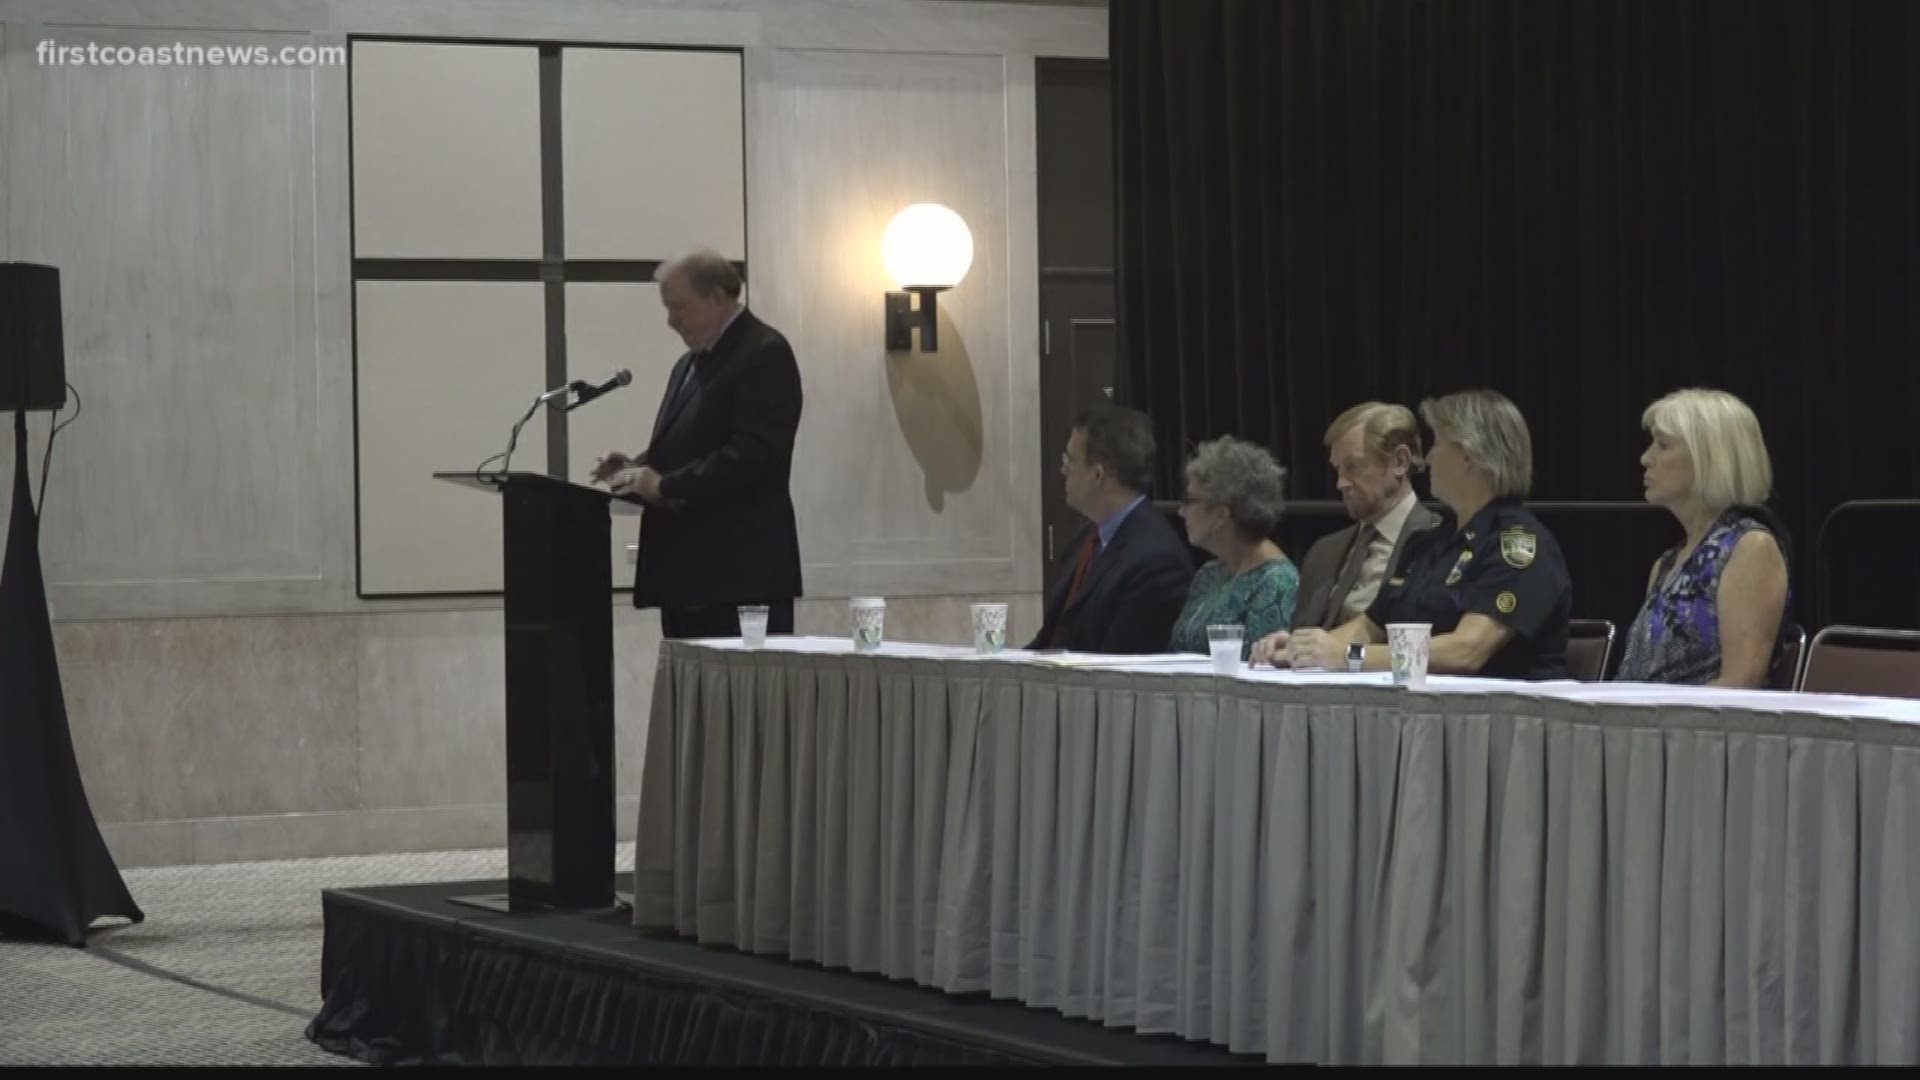 A town hall meeting was held Thursday evening in the Jacksonville Convention Center where a committee established by the National Compassion Fund discussed eligibility for what they've named the Jacksonville Tribute Fund.